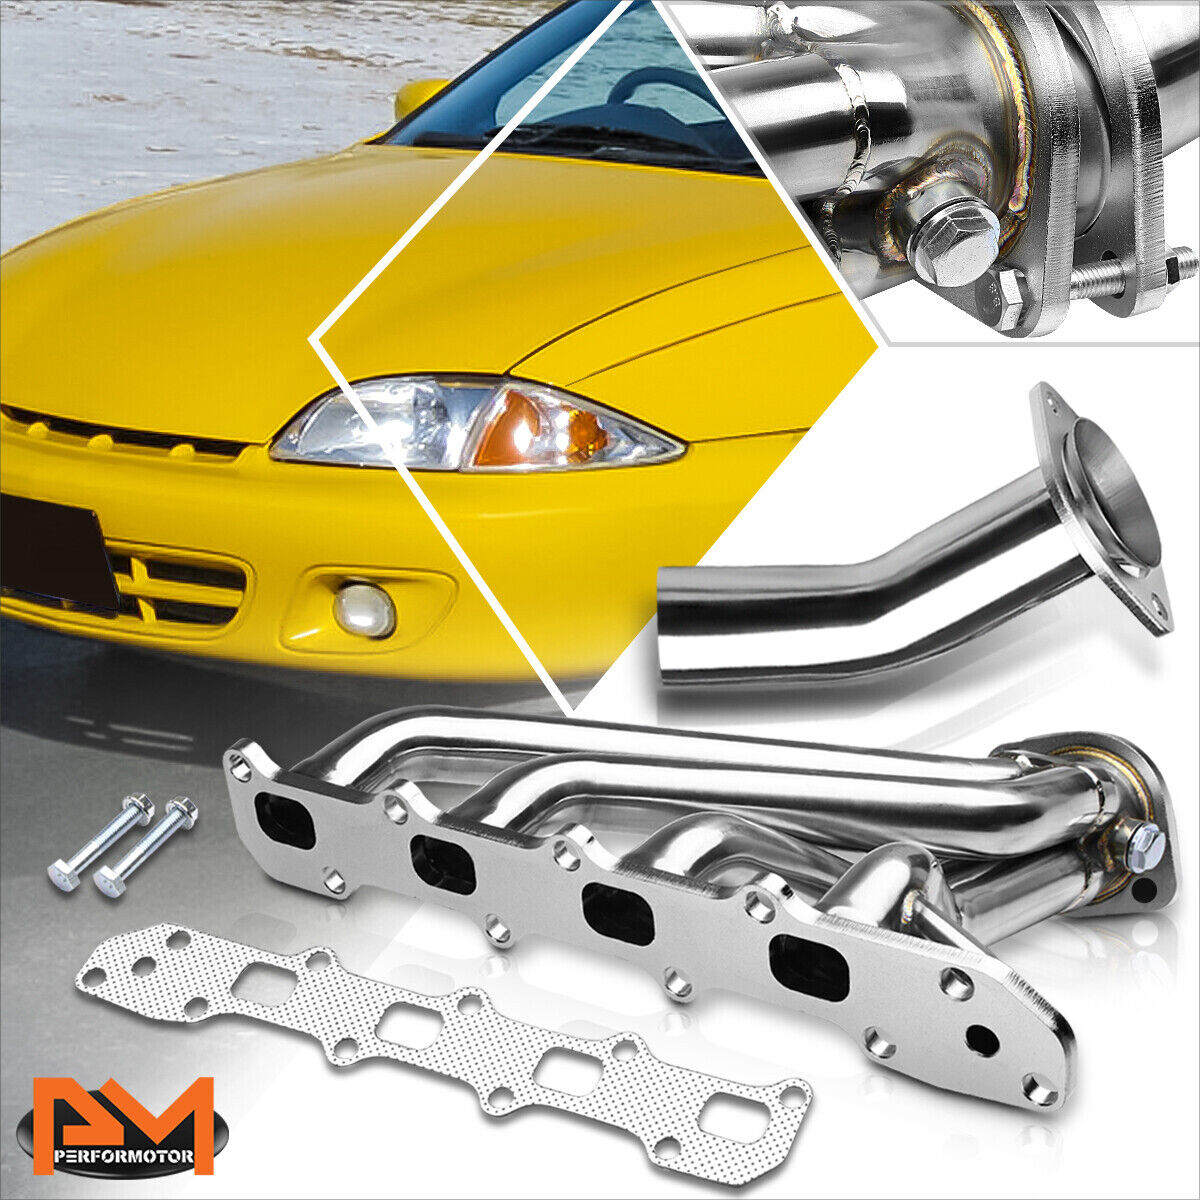 For 96-02 Cavalier/Sunfire 2.4 Stainless Steel Performance 4-1 Exhaust Header